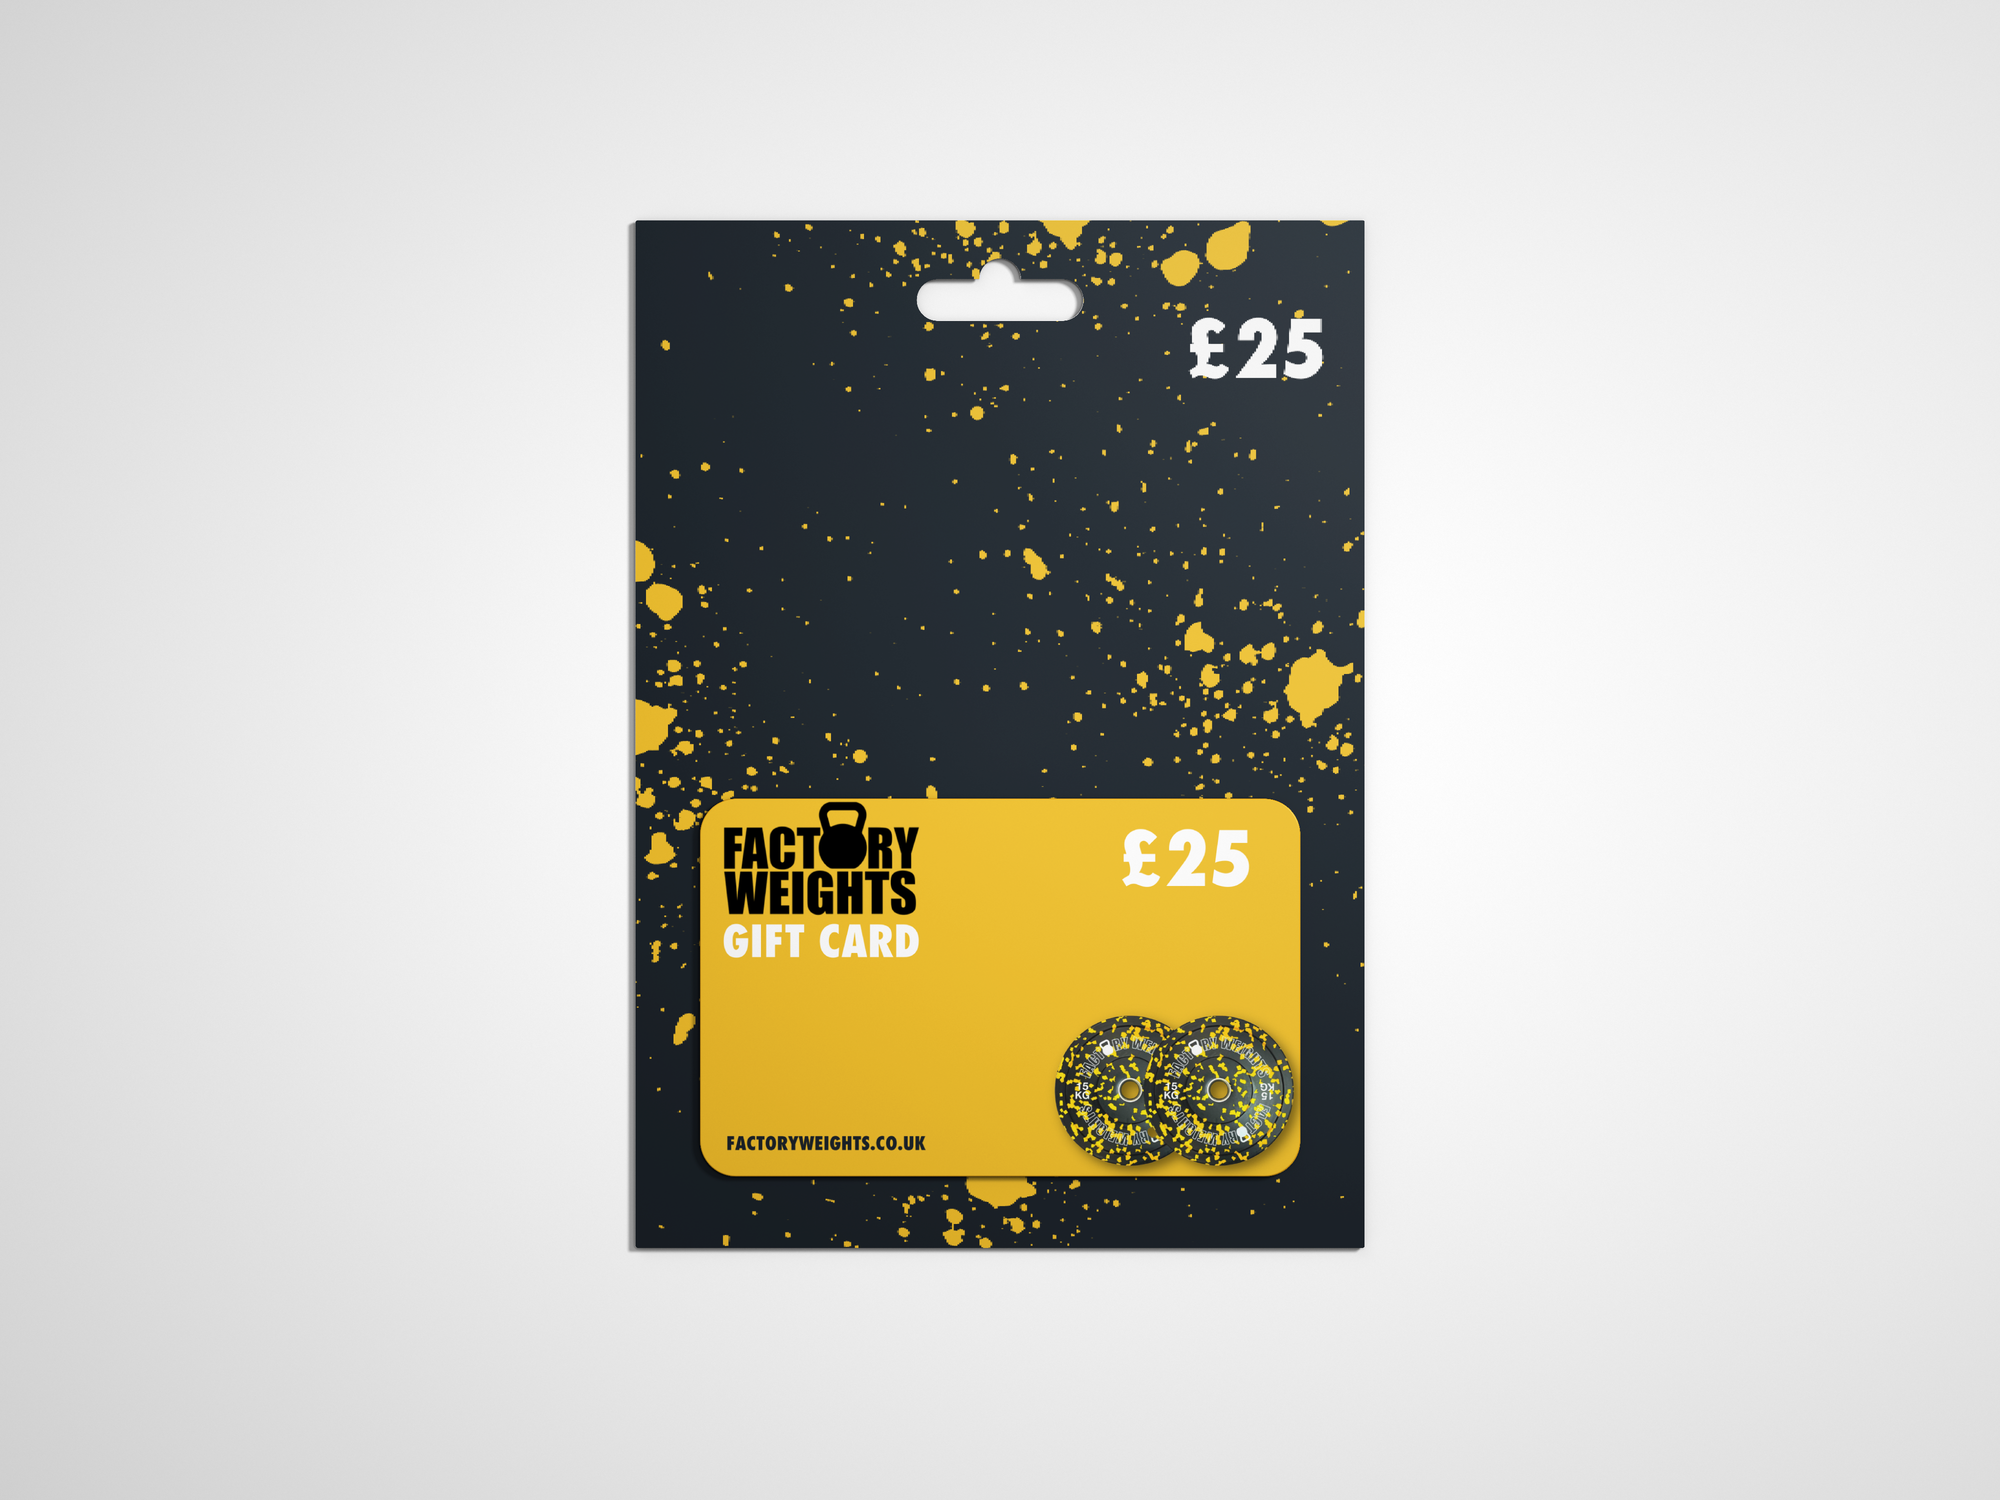 Factory Weights Gift Card £25.00 